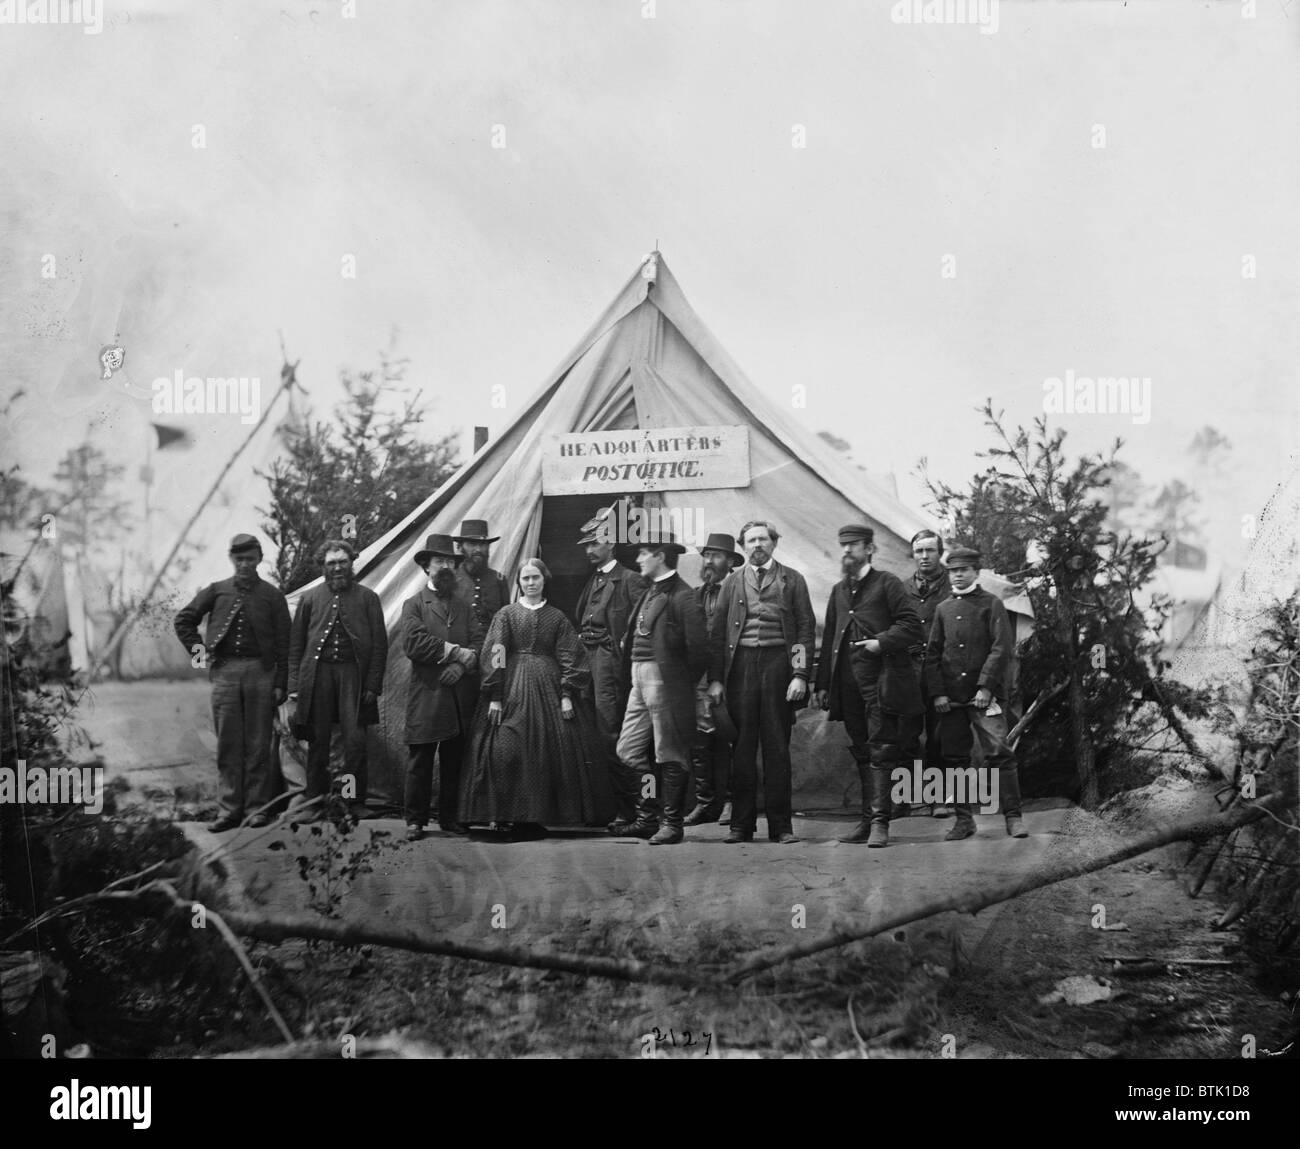 The Civil War, group in front of post office tent at Army of the Potomac headquarters, Falmouth, Virginia, photograph by Timothy H. O'Sullivan, April, 1863. Stock Photo